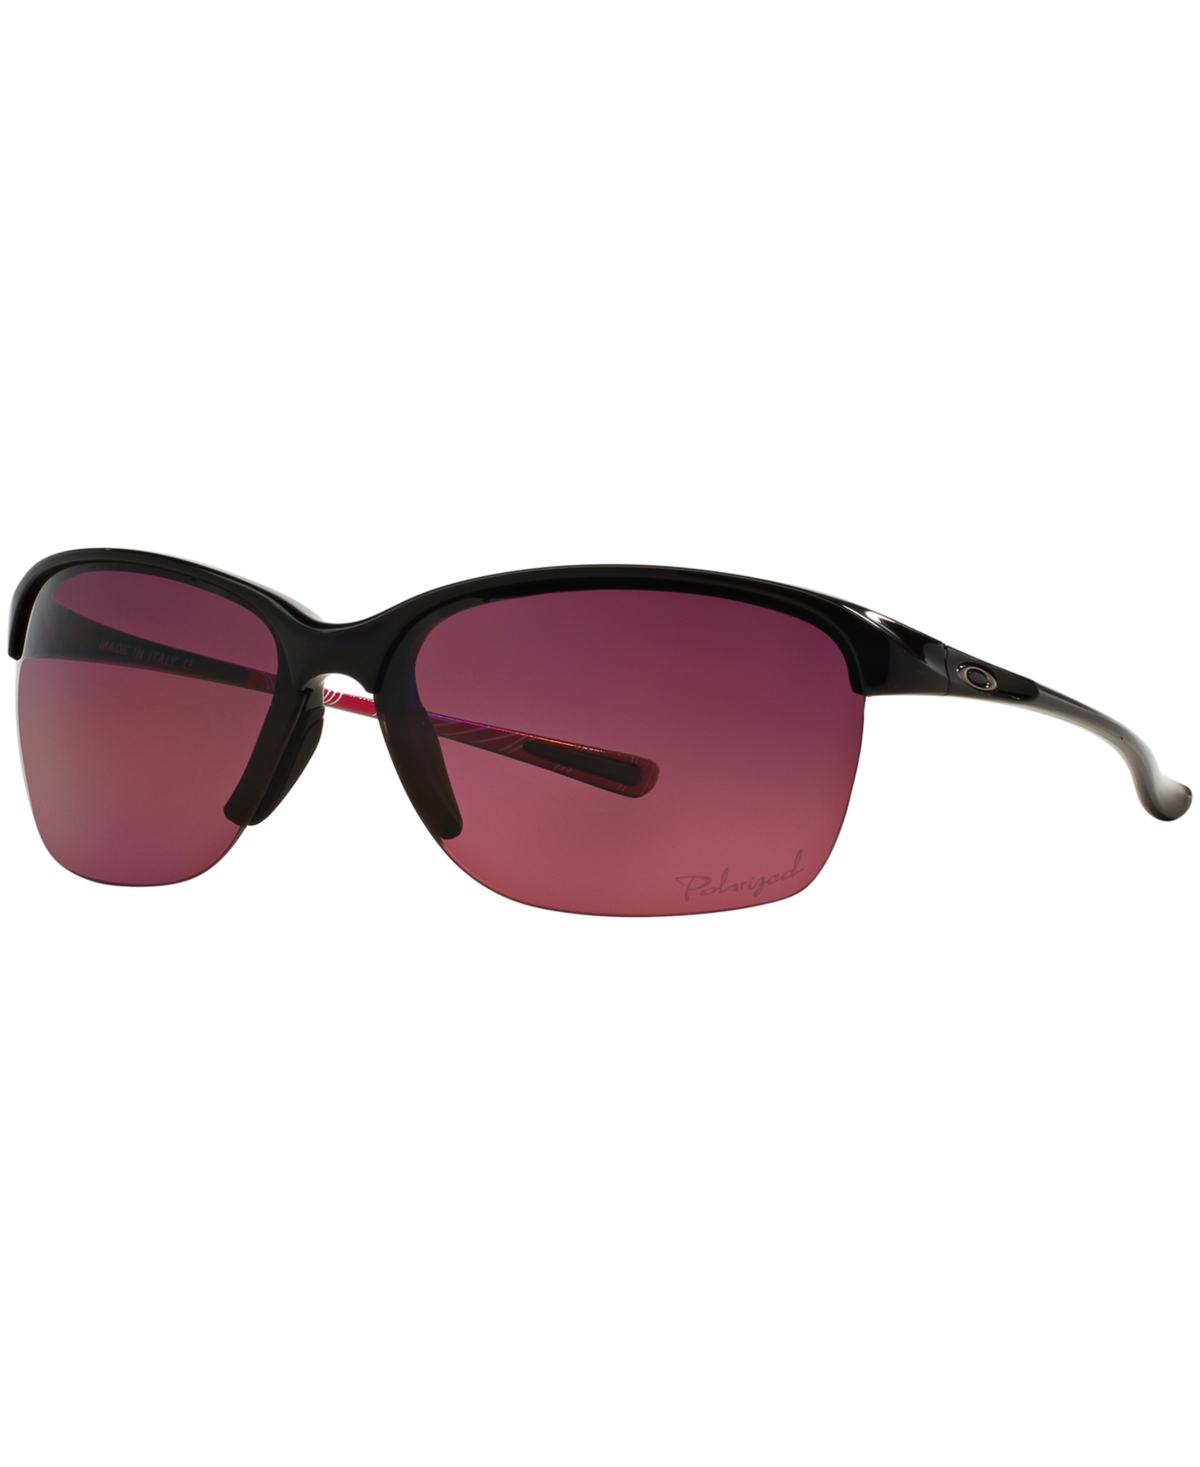 Oakley Unstoppable Polarized Sunglasses ,  Oo9191 In Black Shiny,pink Gradient Polar